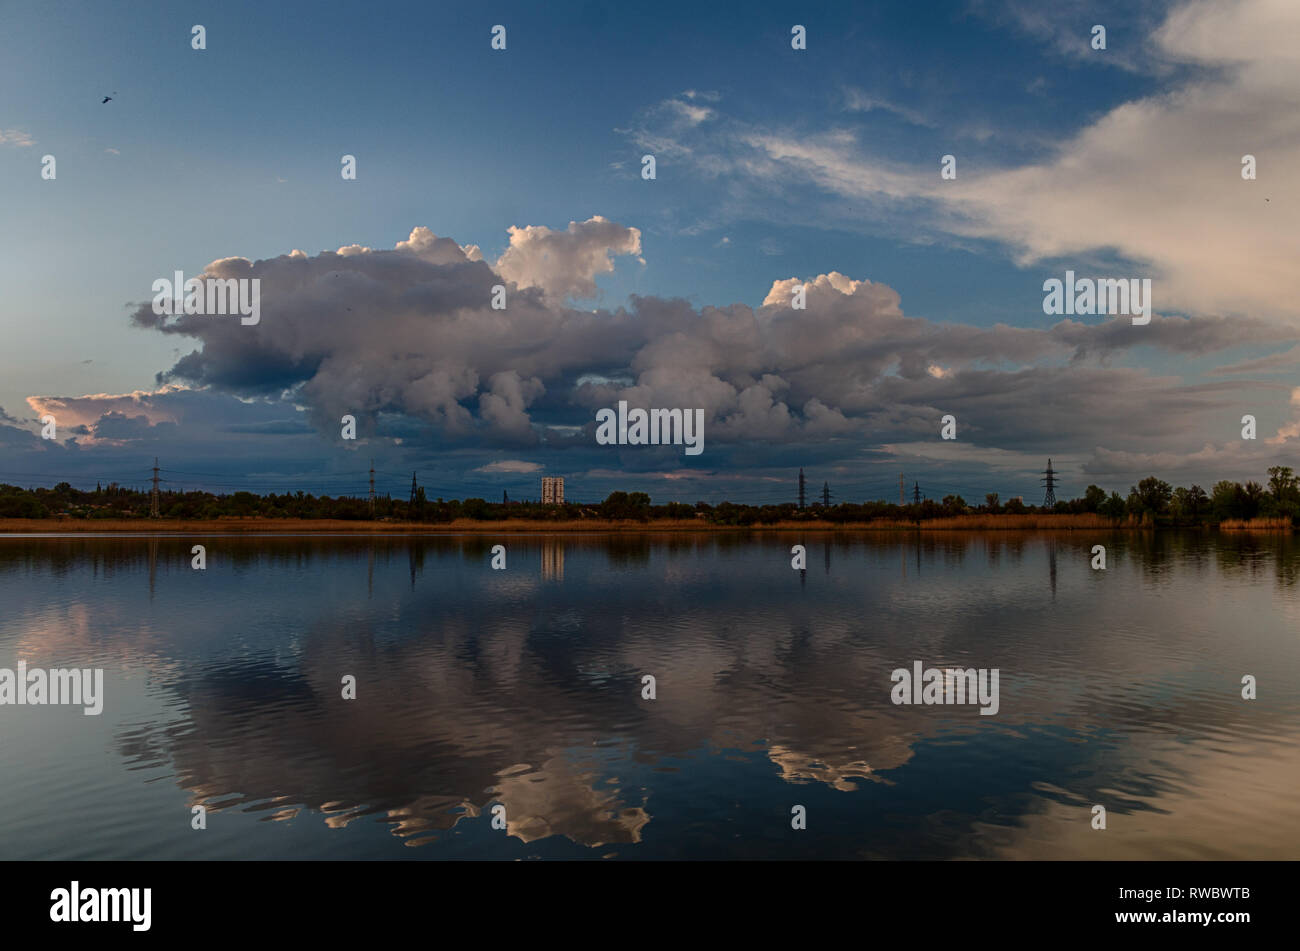 Spring cloudy river landscape with heavy thunderstorm clouds reflected in still water in Ukraine Stock Photo